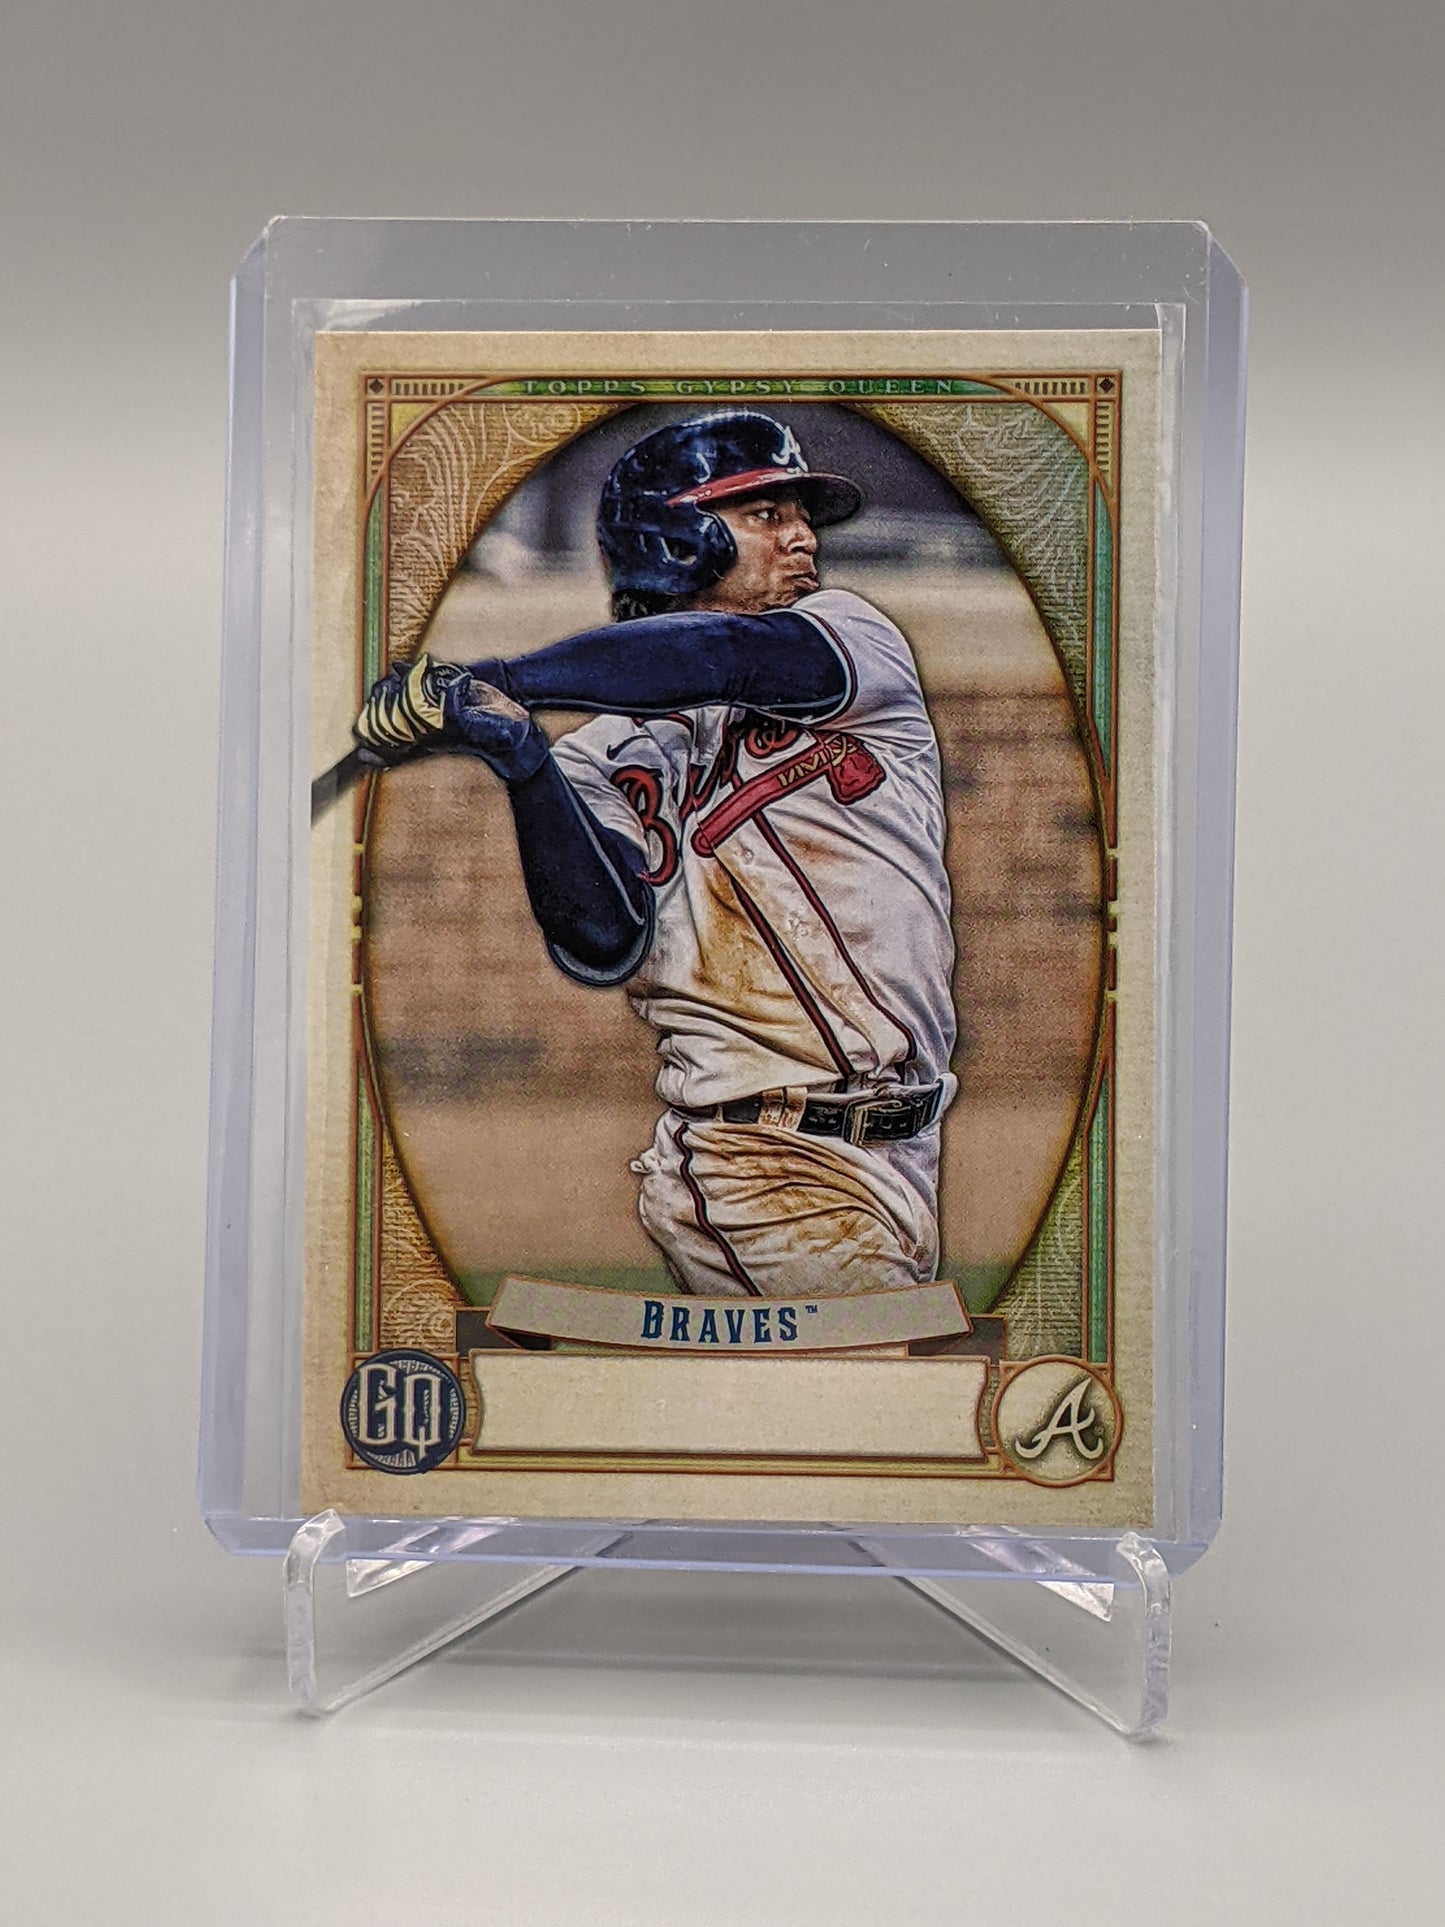 2021 Topps Gypsy Queen Missing Nameplate #267 Ozzie Albies Braves